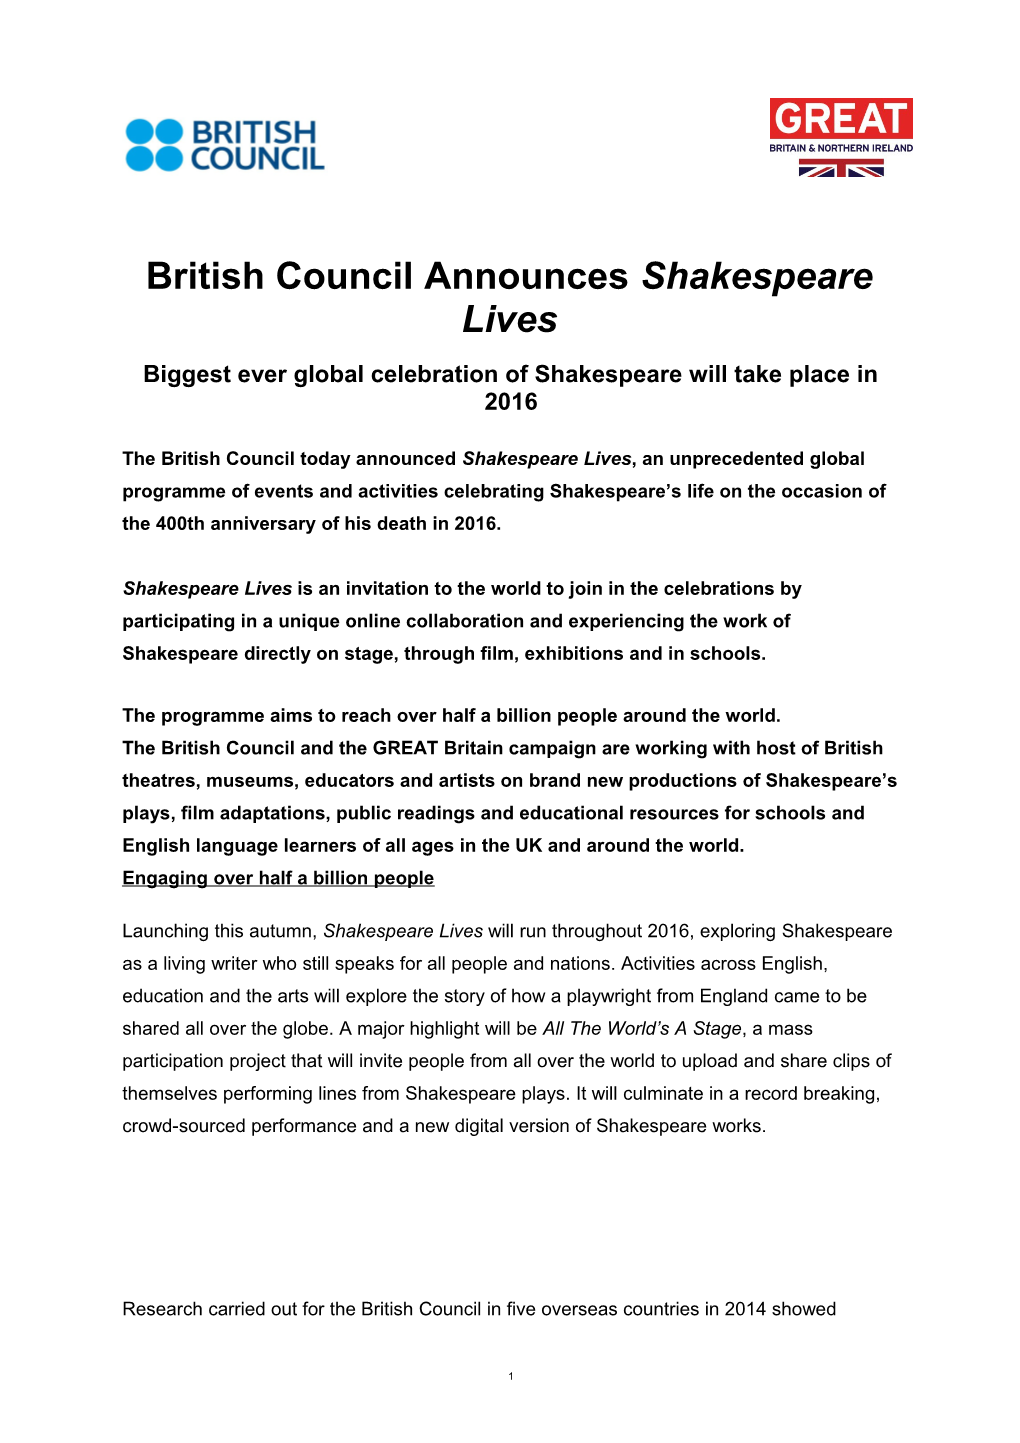 Biggest Everglobalcelebration of Shakespearewill Take Place in 2016